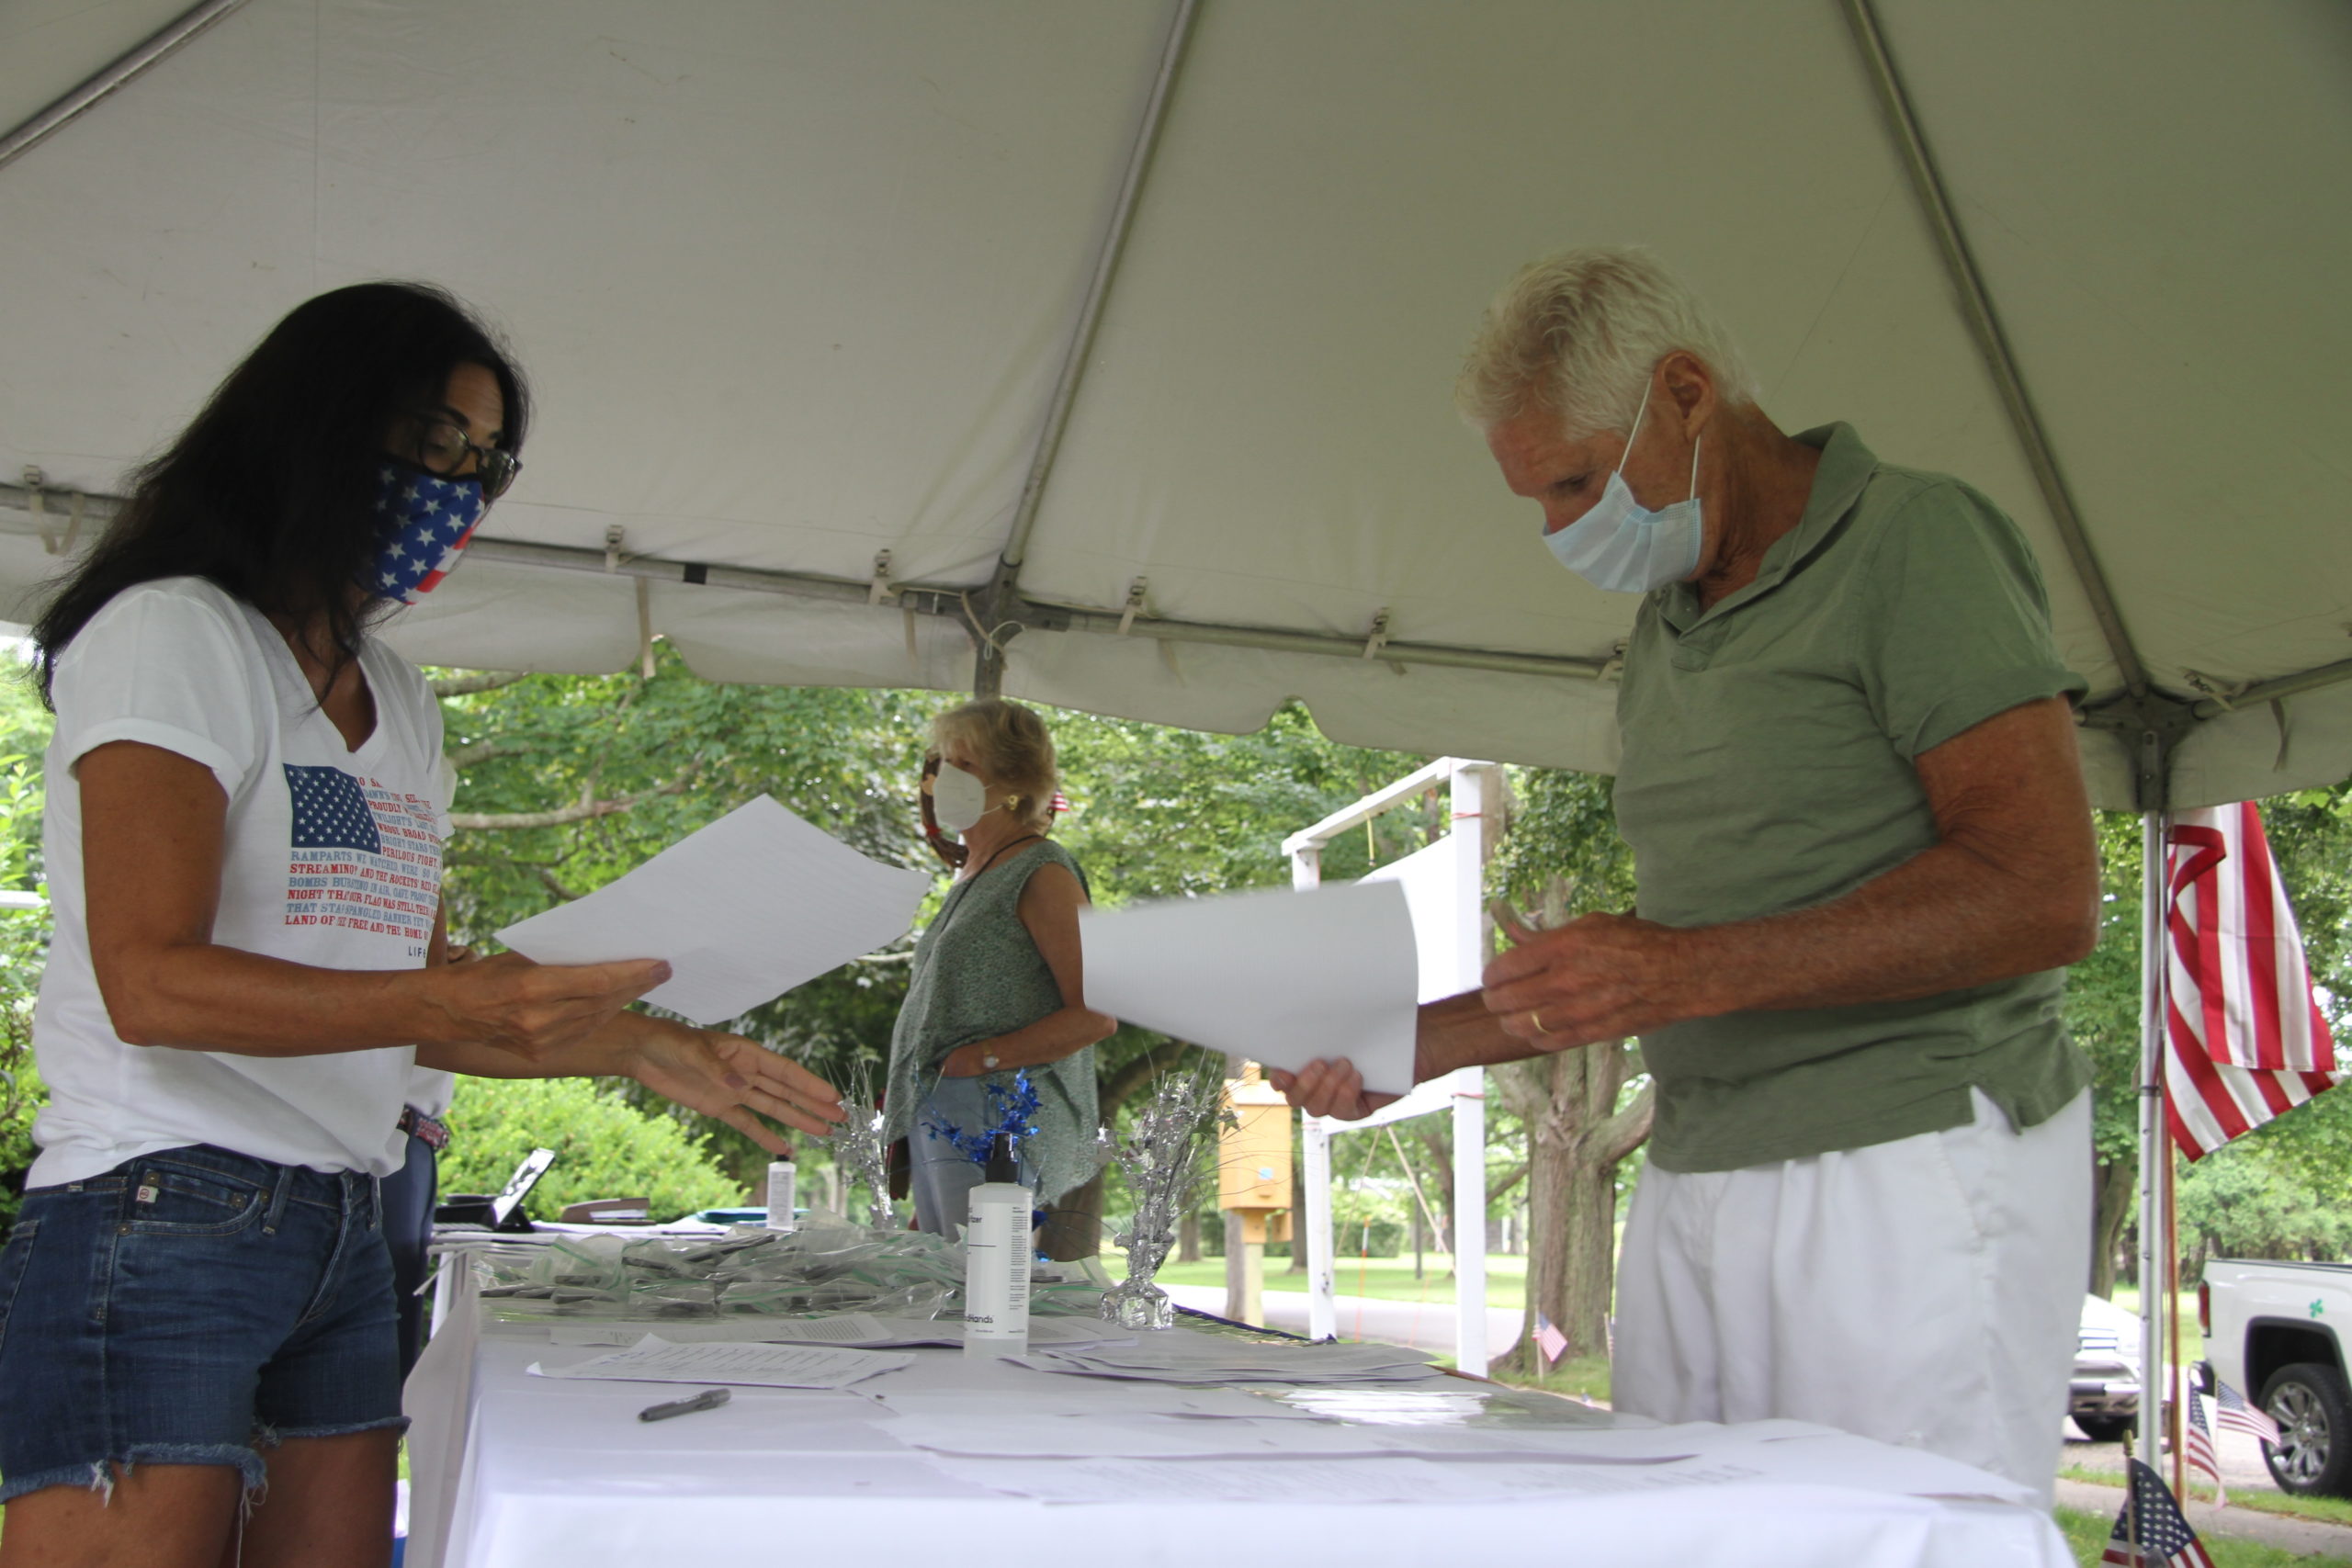 Members of the Citizens for the Preservation of Wainscott gathered signatures on a petition to incorporate the hamlet into a village over the Fourth of July weekend. 